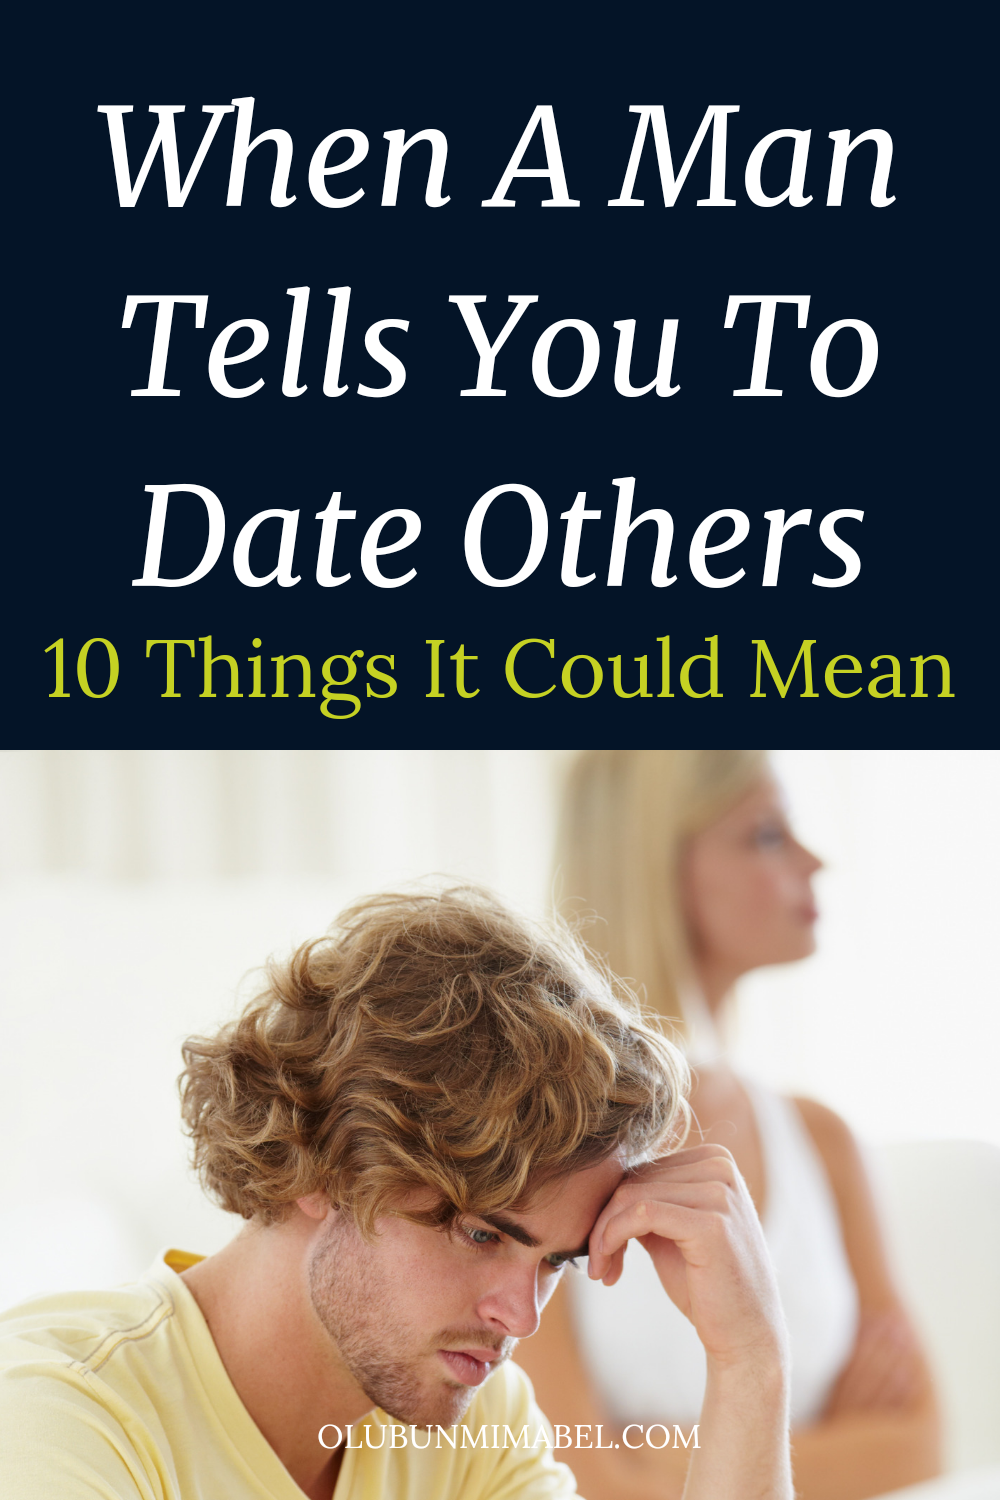 When a Man Tells You To Date Others